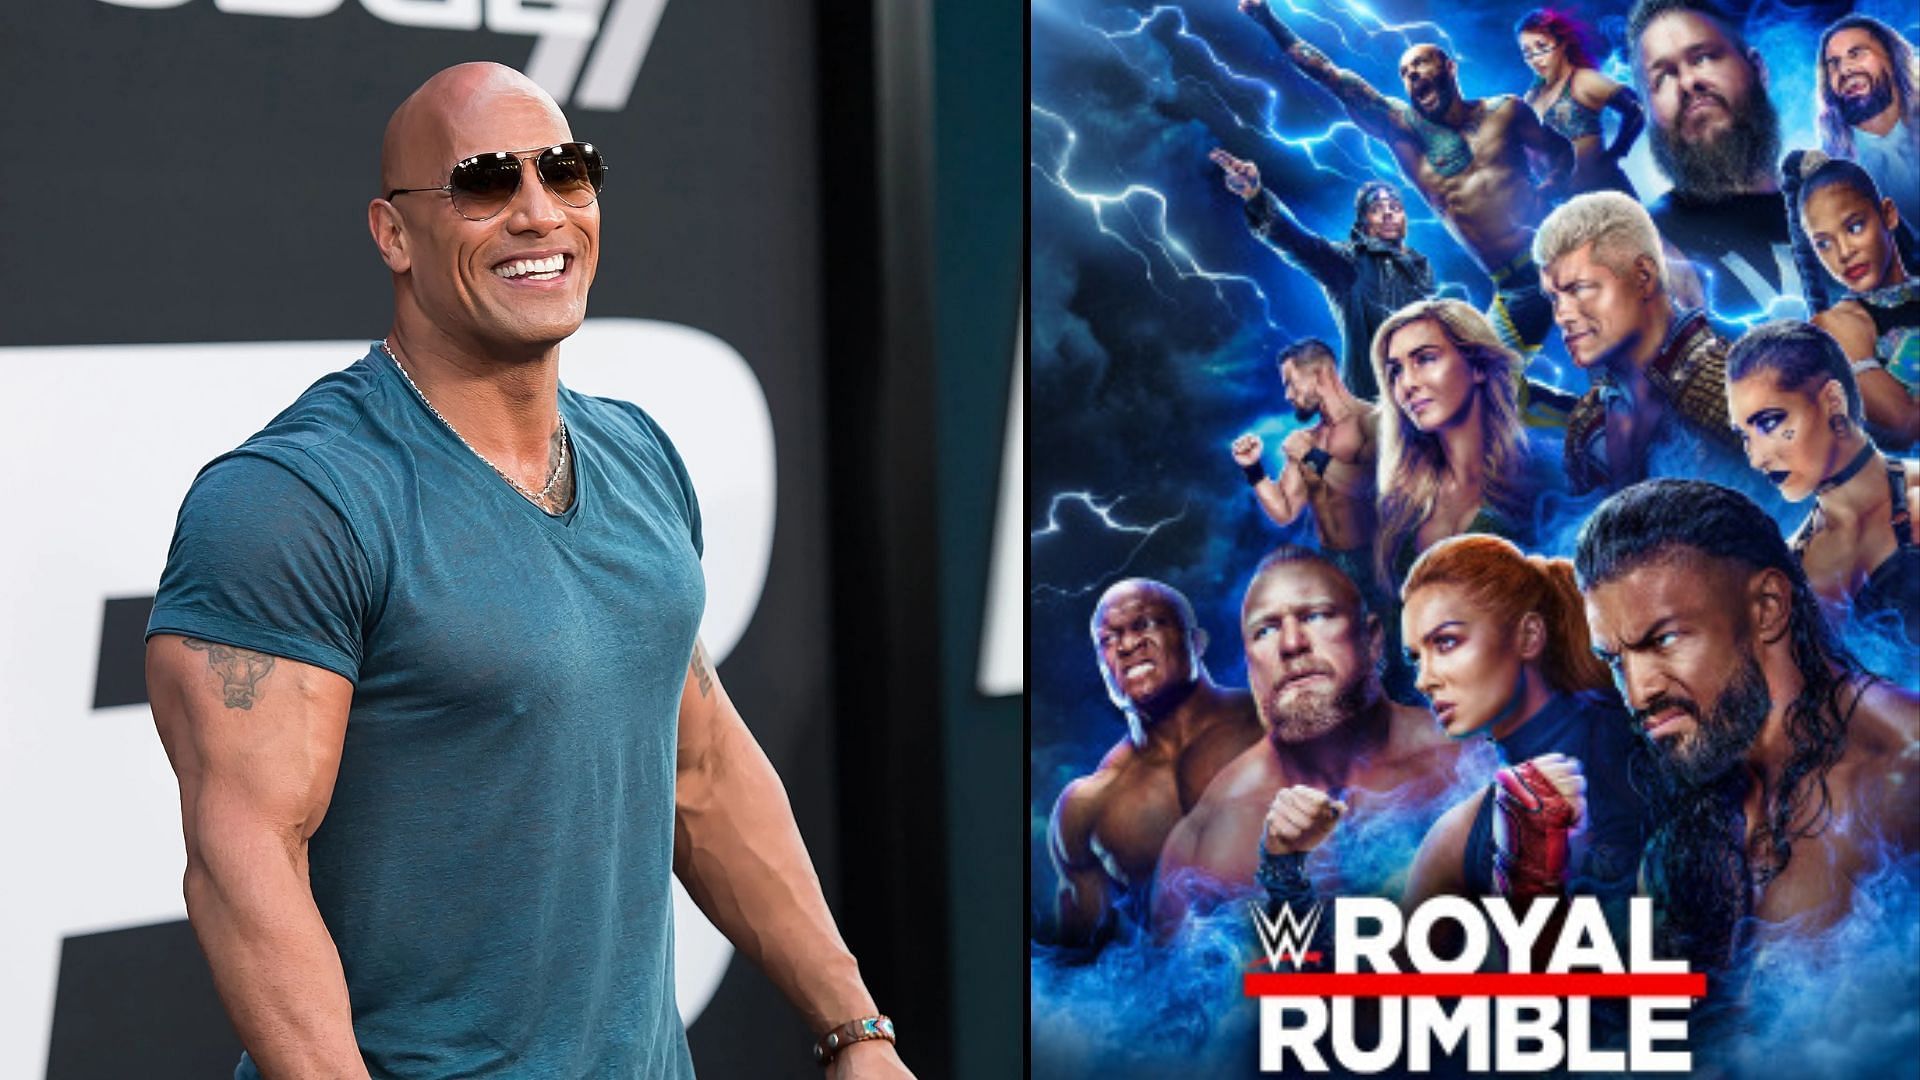 The Rock was heavily rumored ahead of the Royal Rumble to win the titular bout